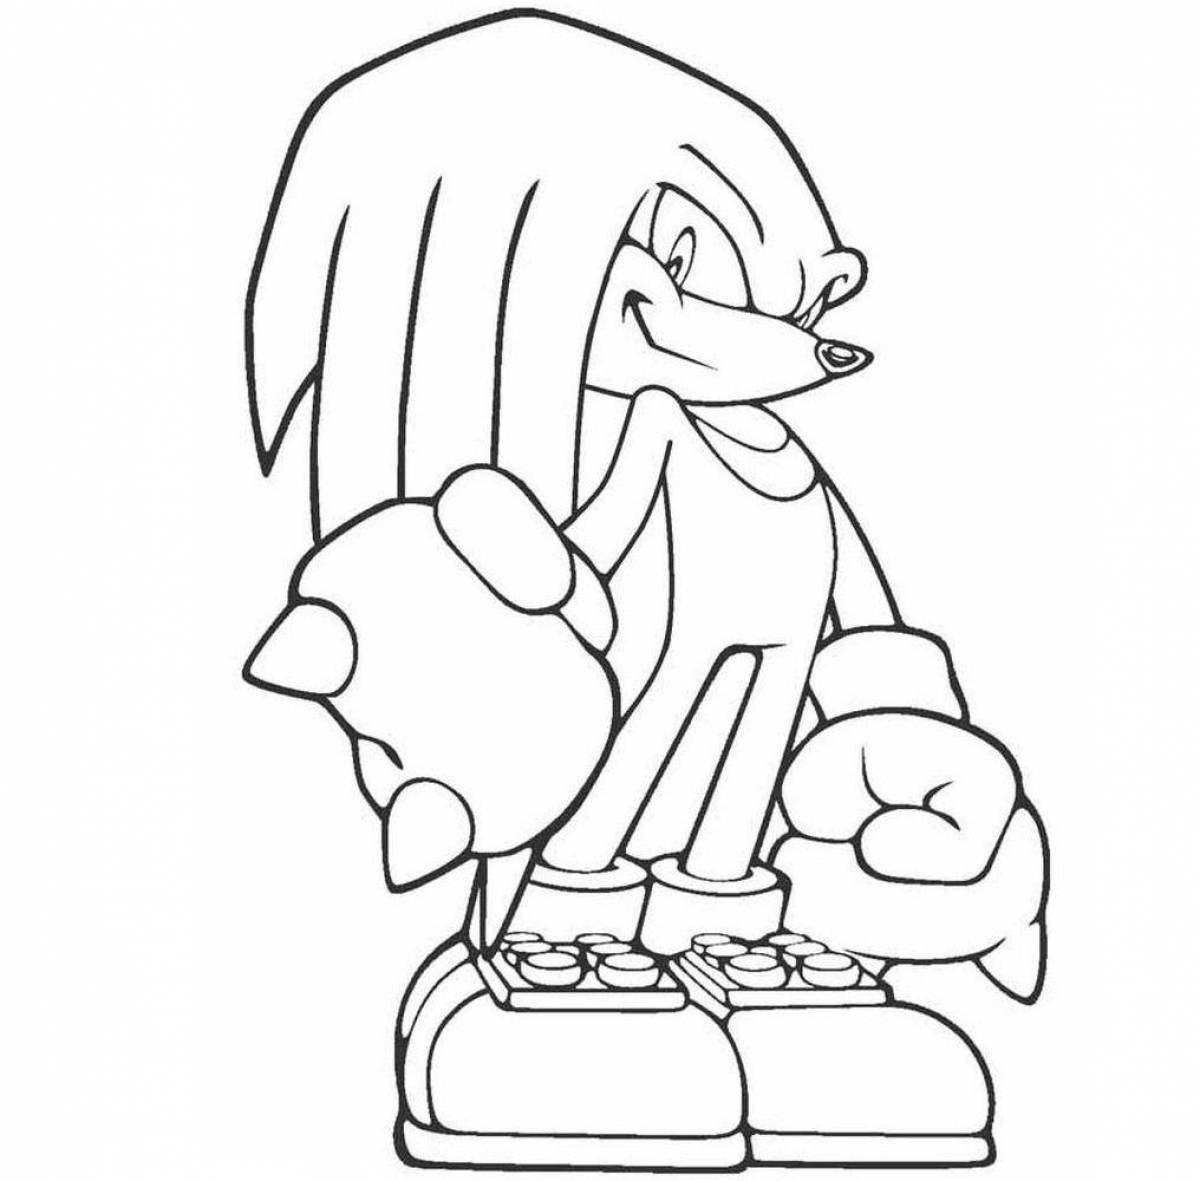 Coloring book charming echidna knuckles